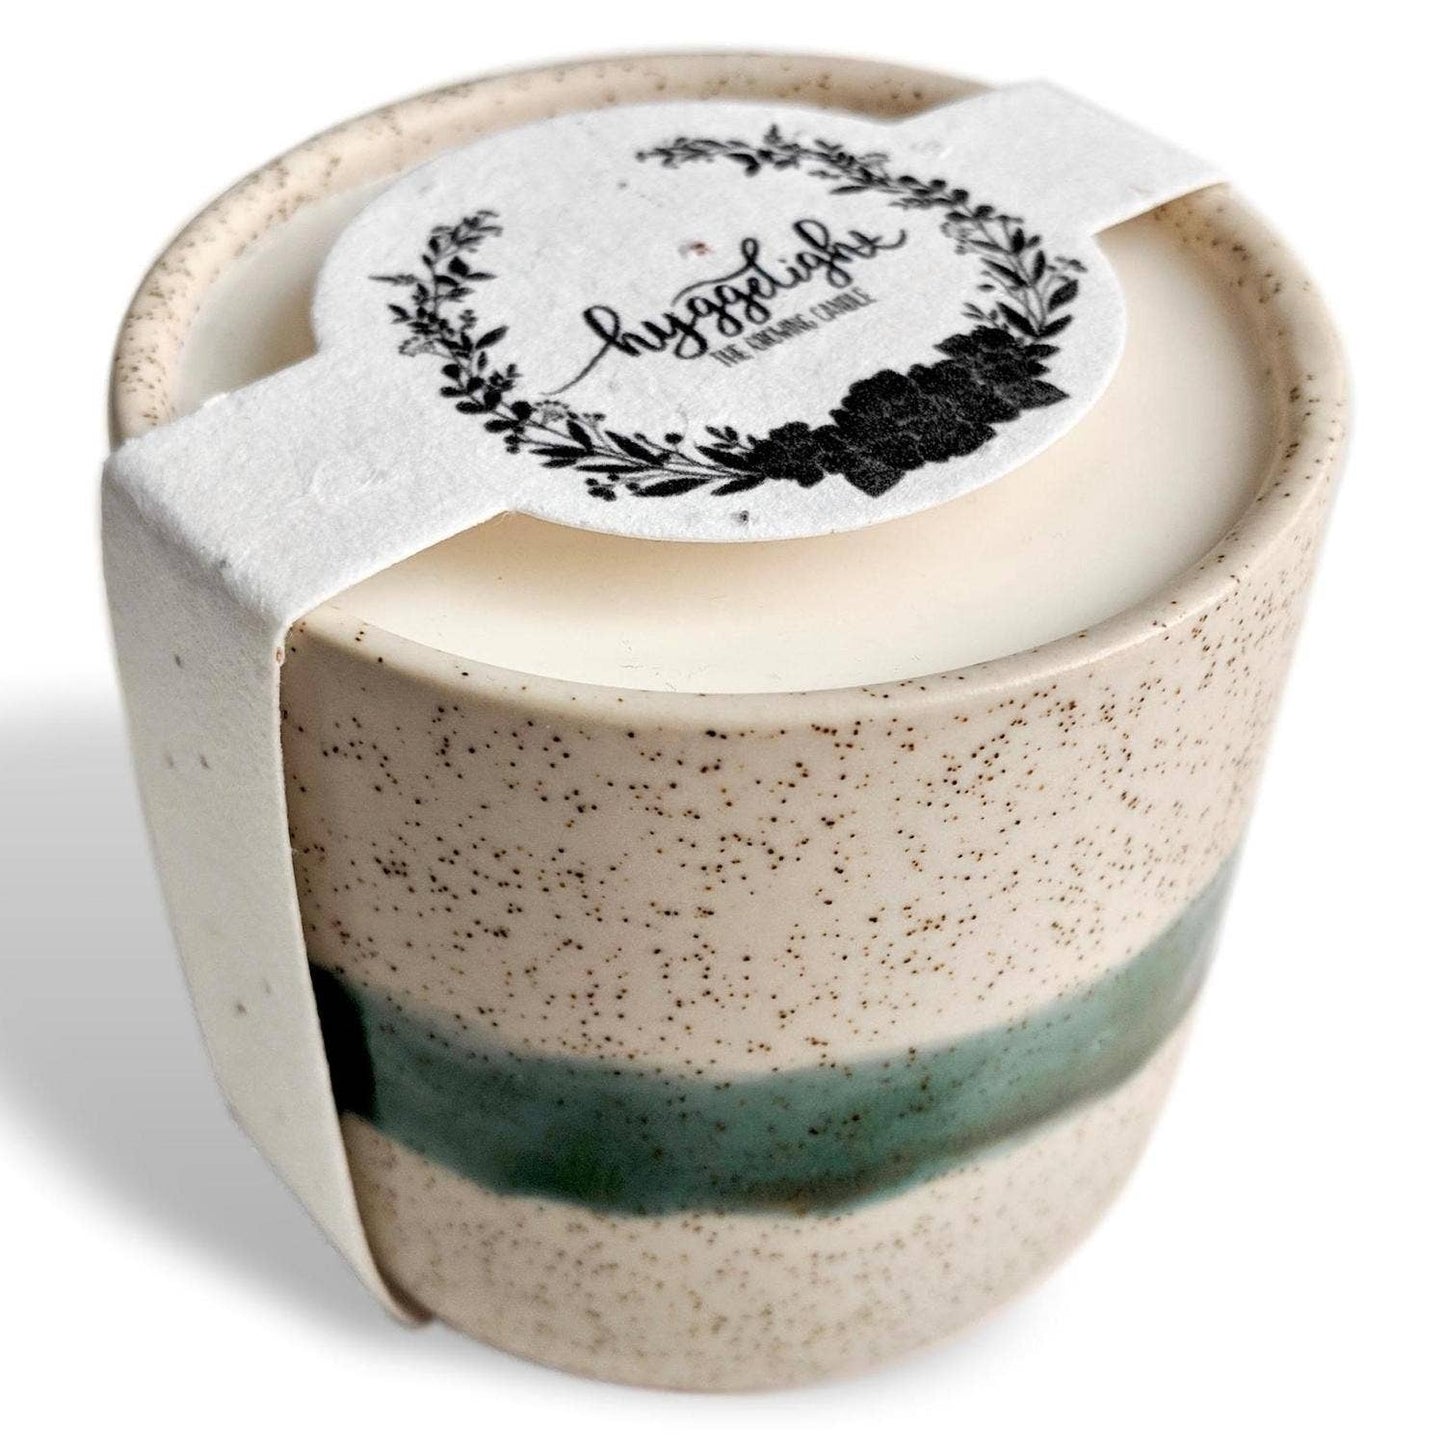 Hyggelight | The Growing Candle ® - Edith | Growing Candle, 8 oz soy wax, wildflower seed label - An Initial Impression